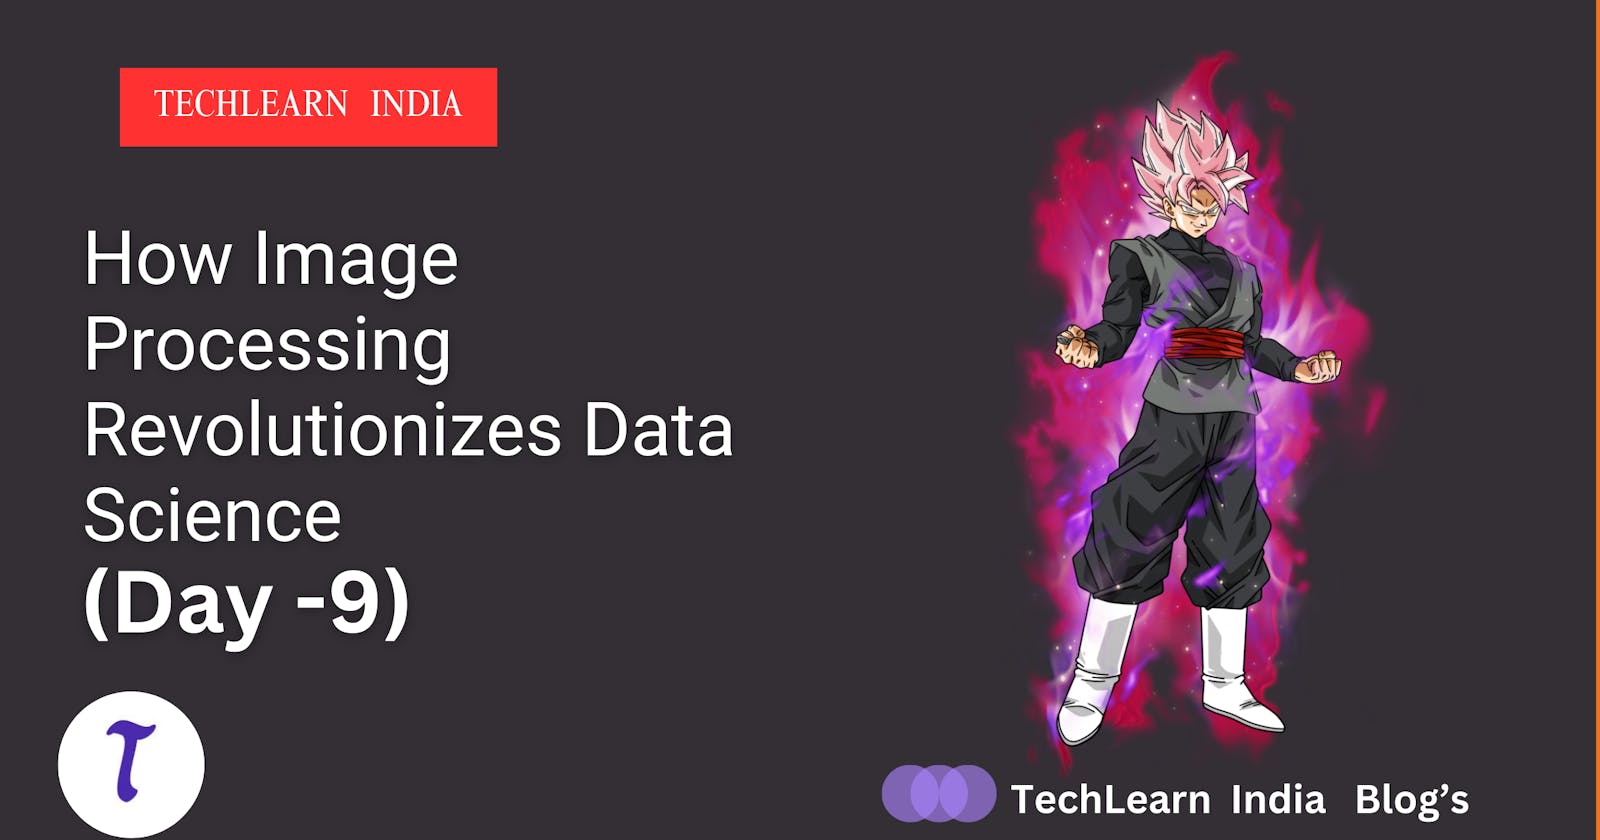 How Image Processing Revolutionizes Data Science -( Day 9)